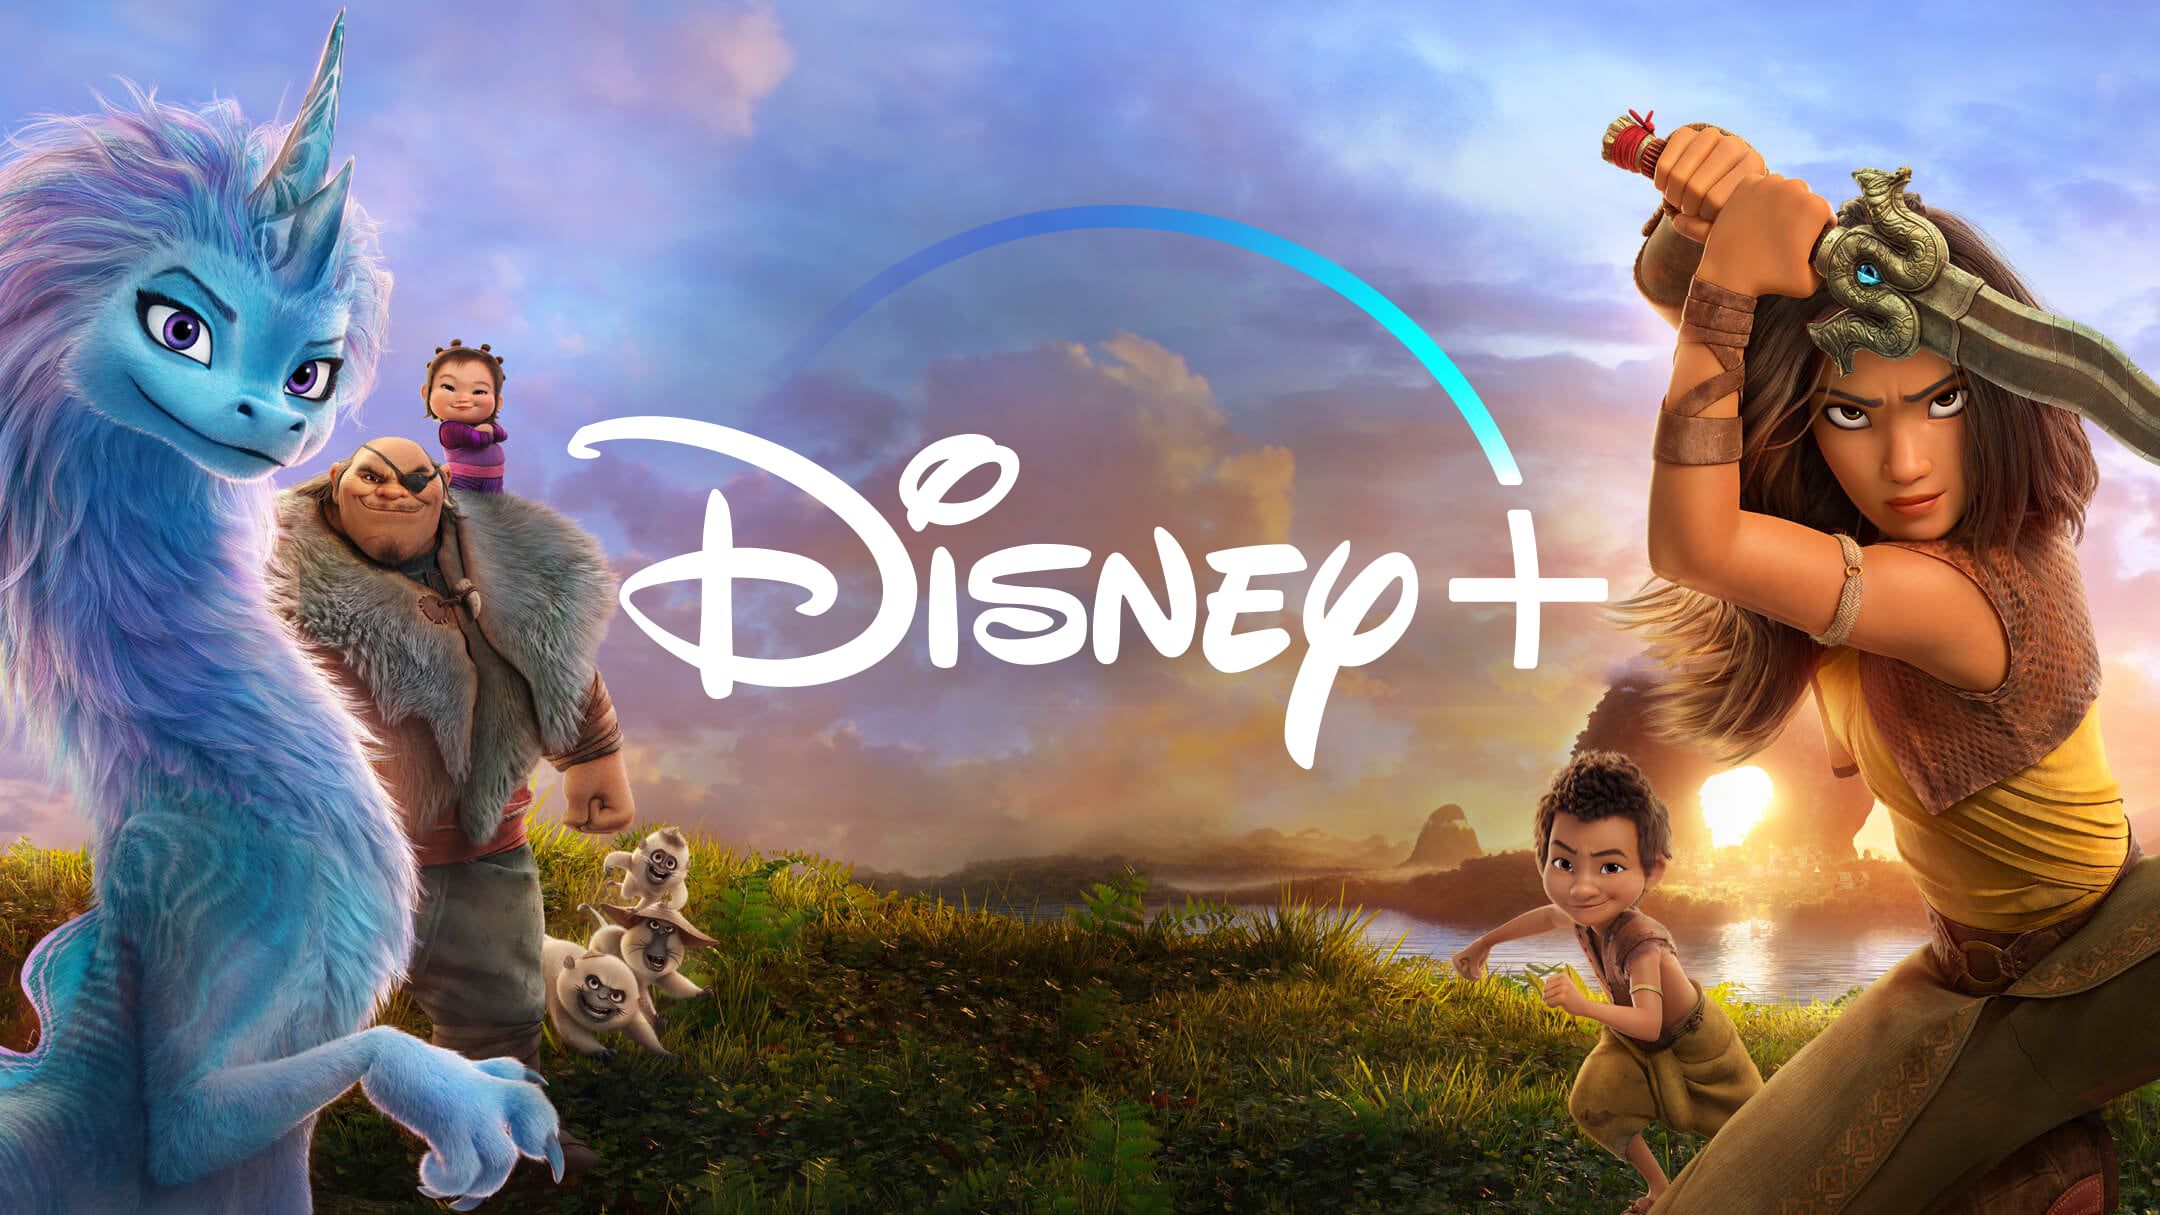 Disney+ Has 118.1 Million Subscribers Two Years After Launch